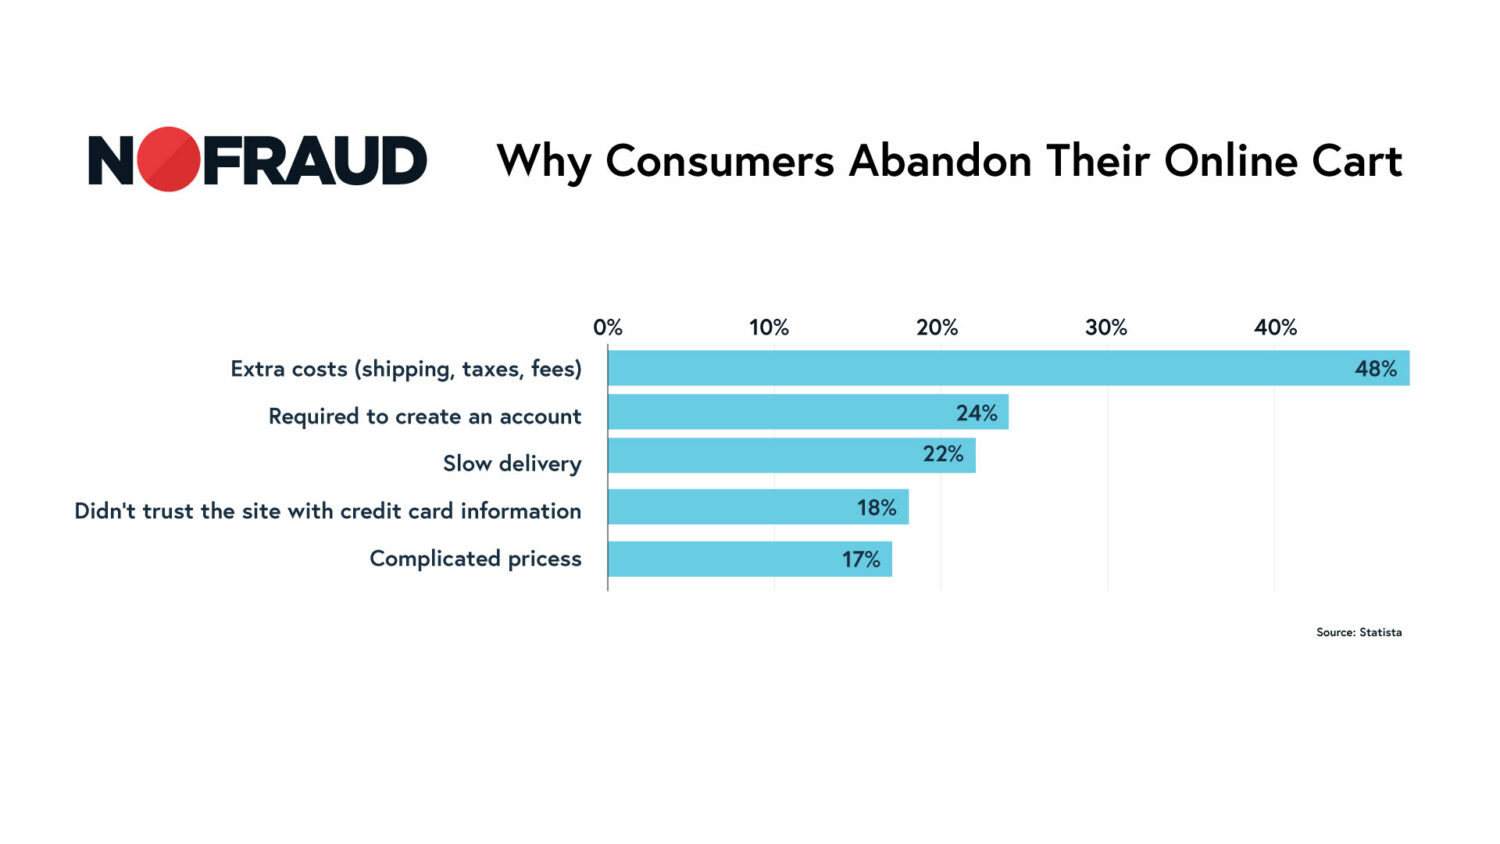 Reasons why consumers abandon their online cart.